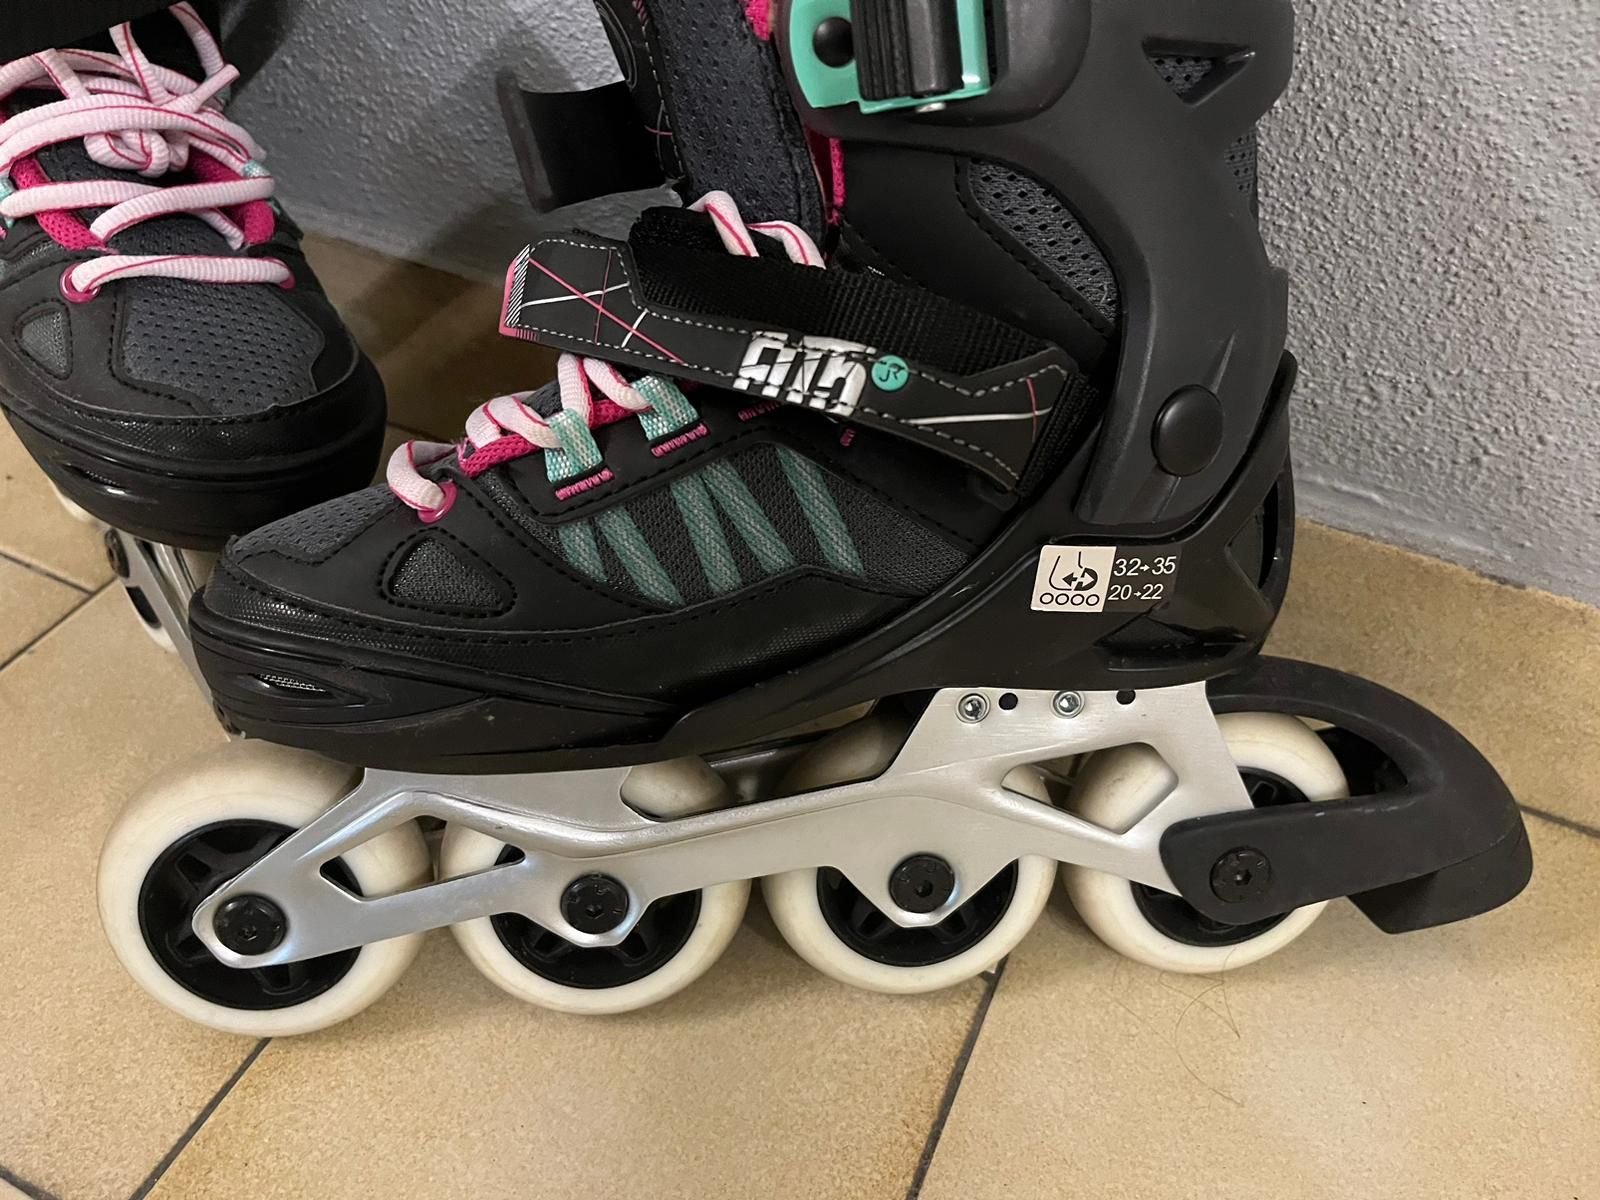 Patins Oxelo 32-35 cm